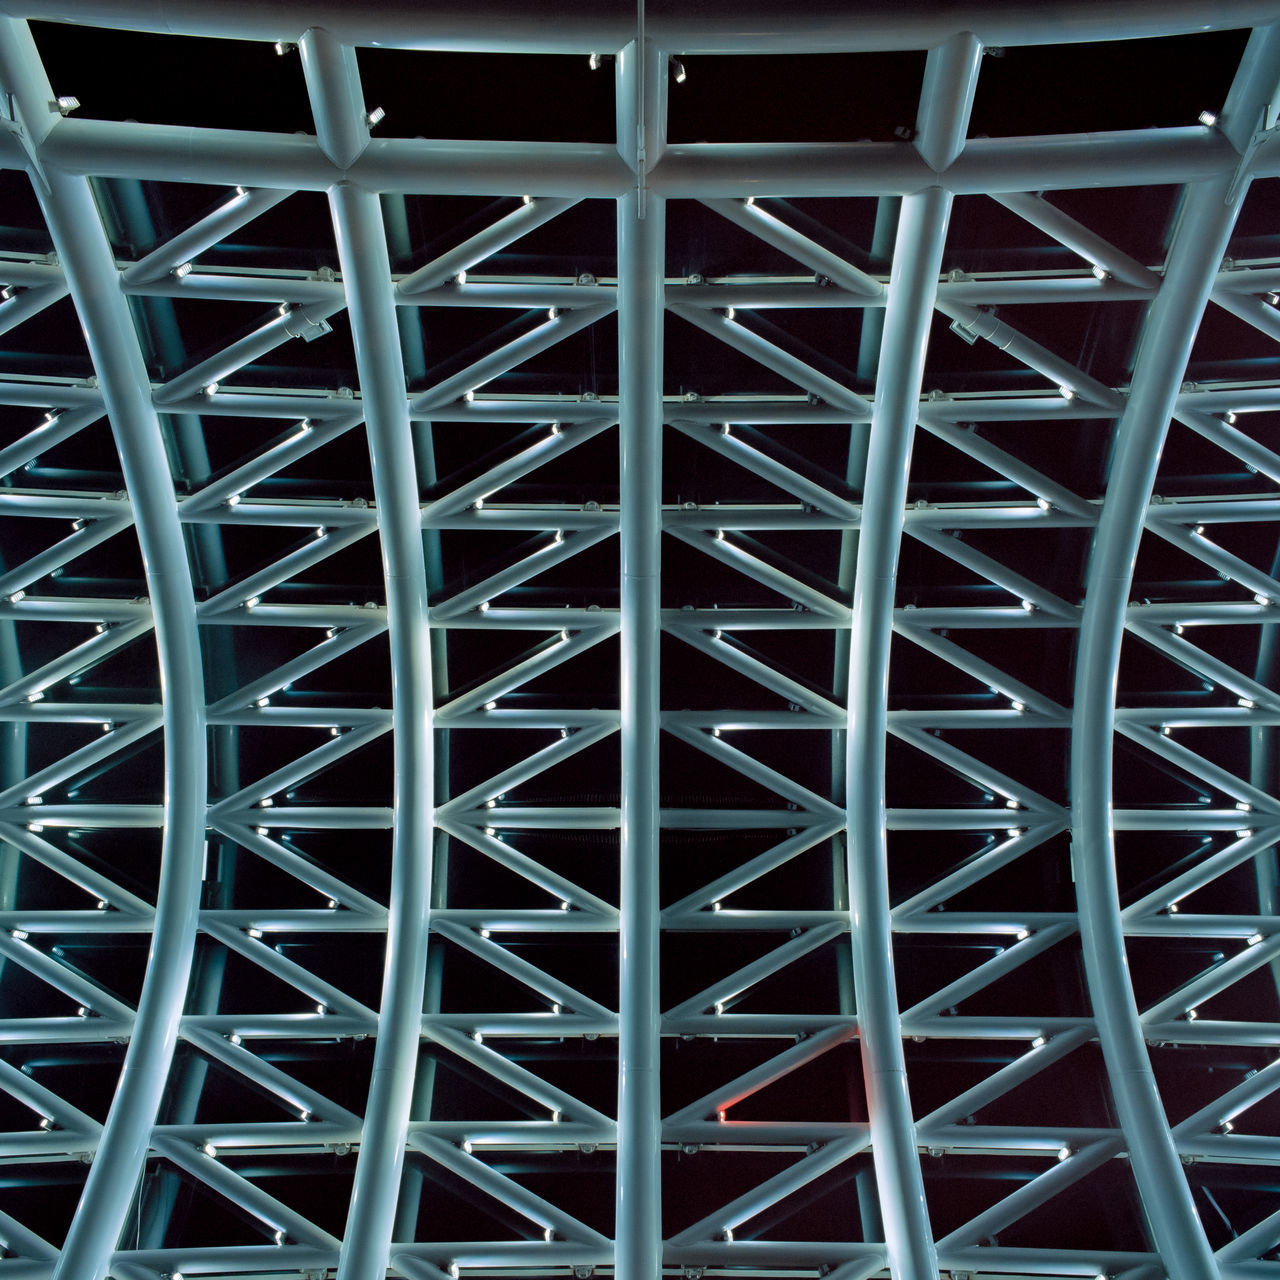 FULL FRAME SHOT OF METAL STRUCTURE